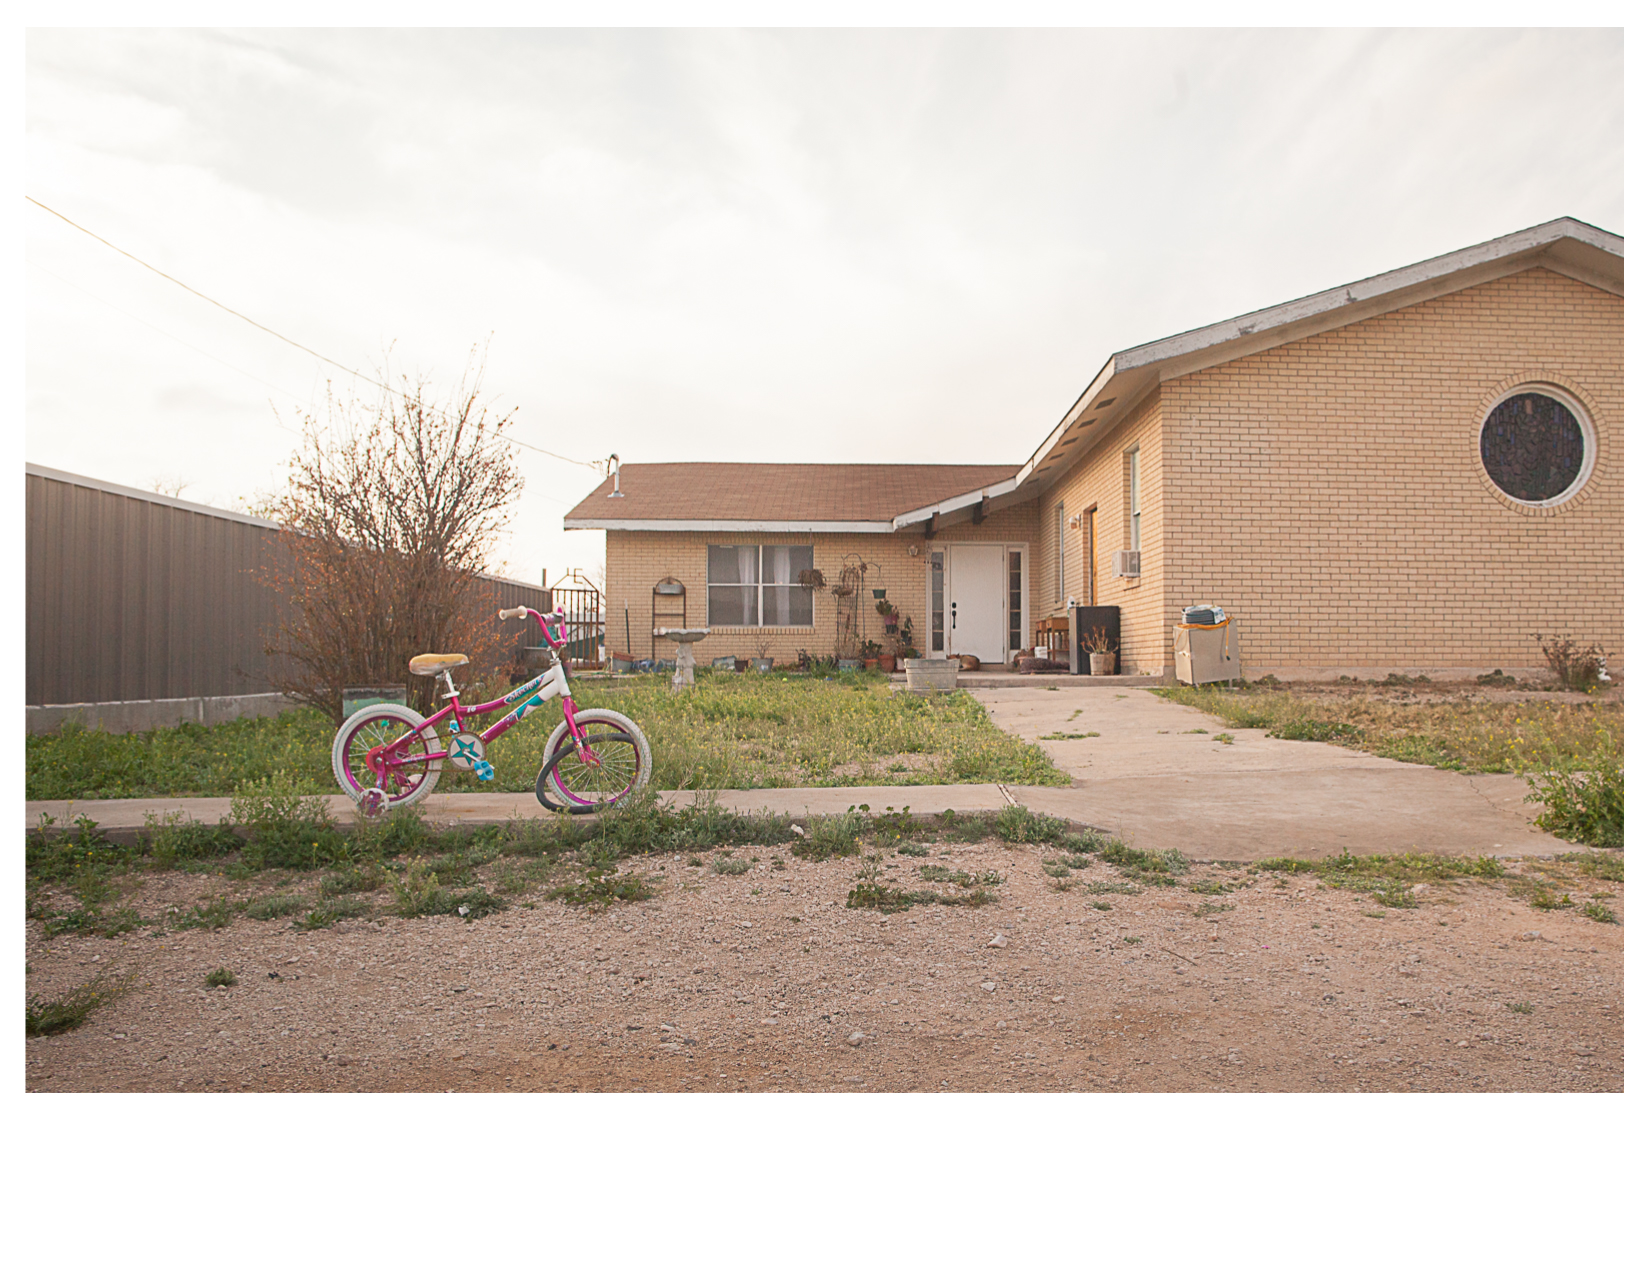 Bicycle and Front Yard, Sanderson, TX